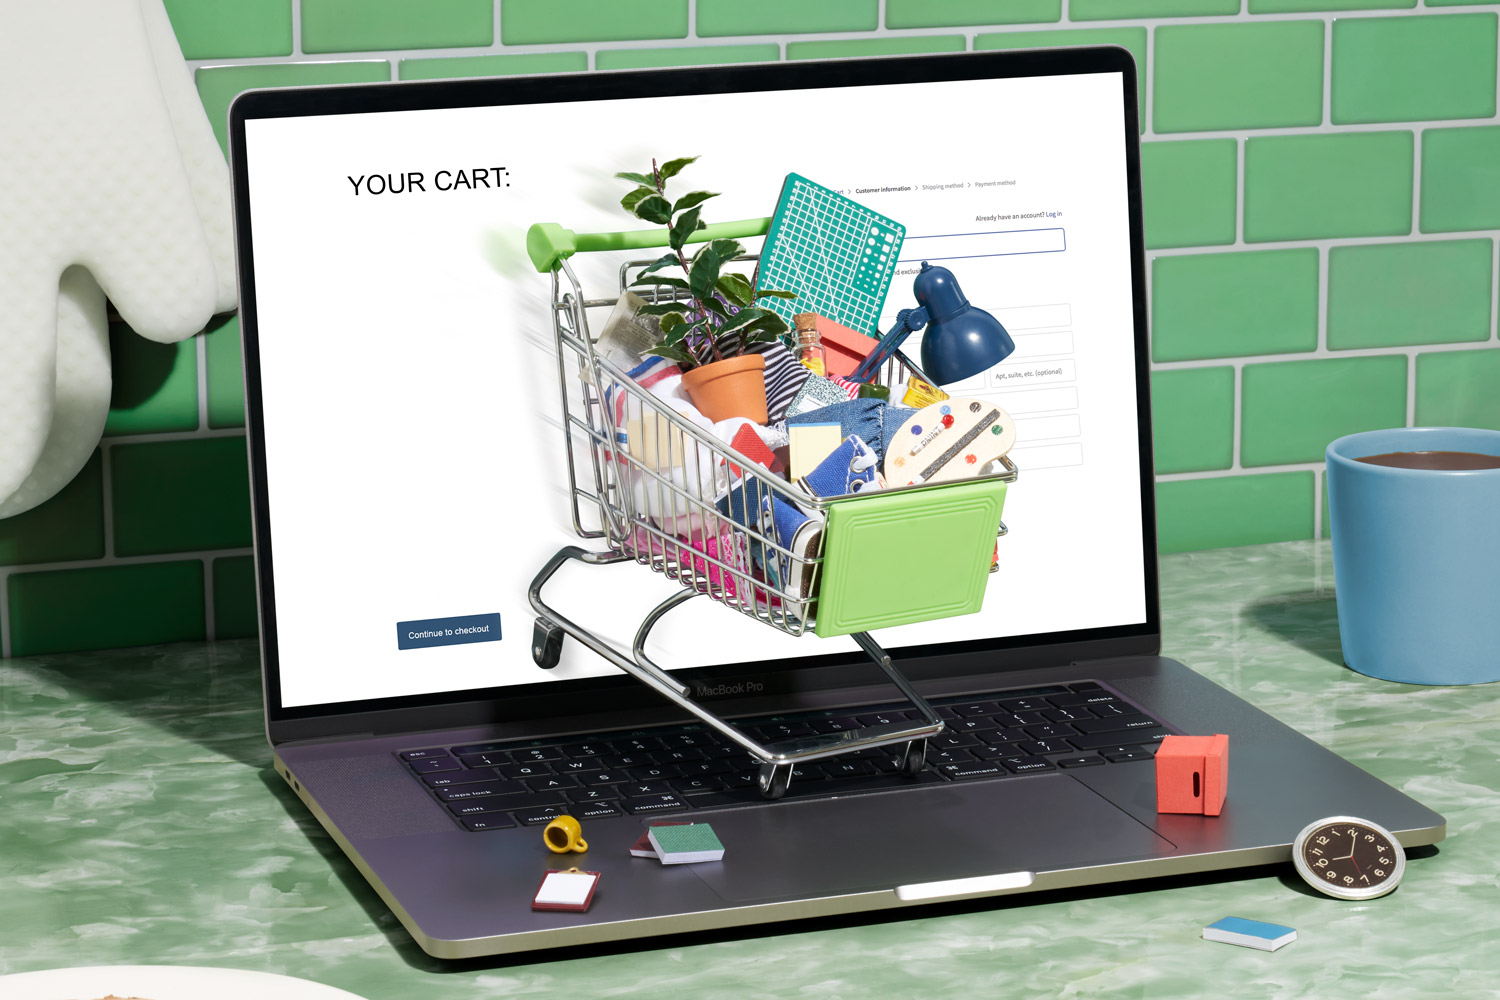 An image of a laptop screen with a shopping cart